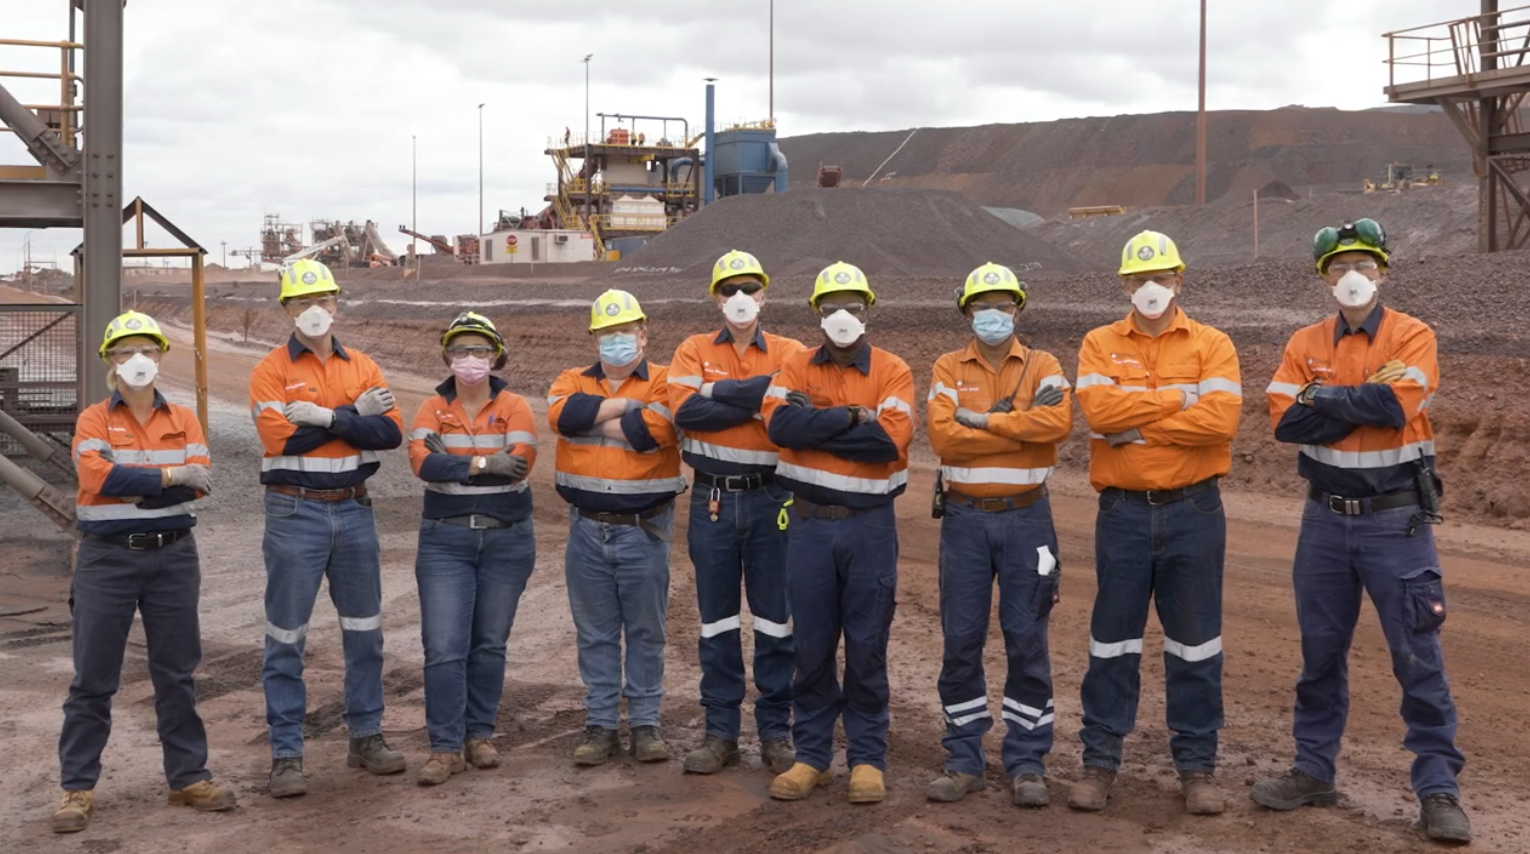 First GREENSTEEL-ready pellets at Whyalla